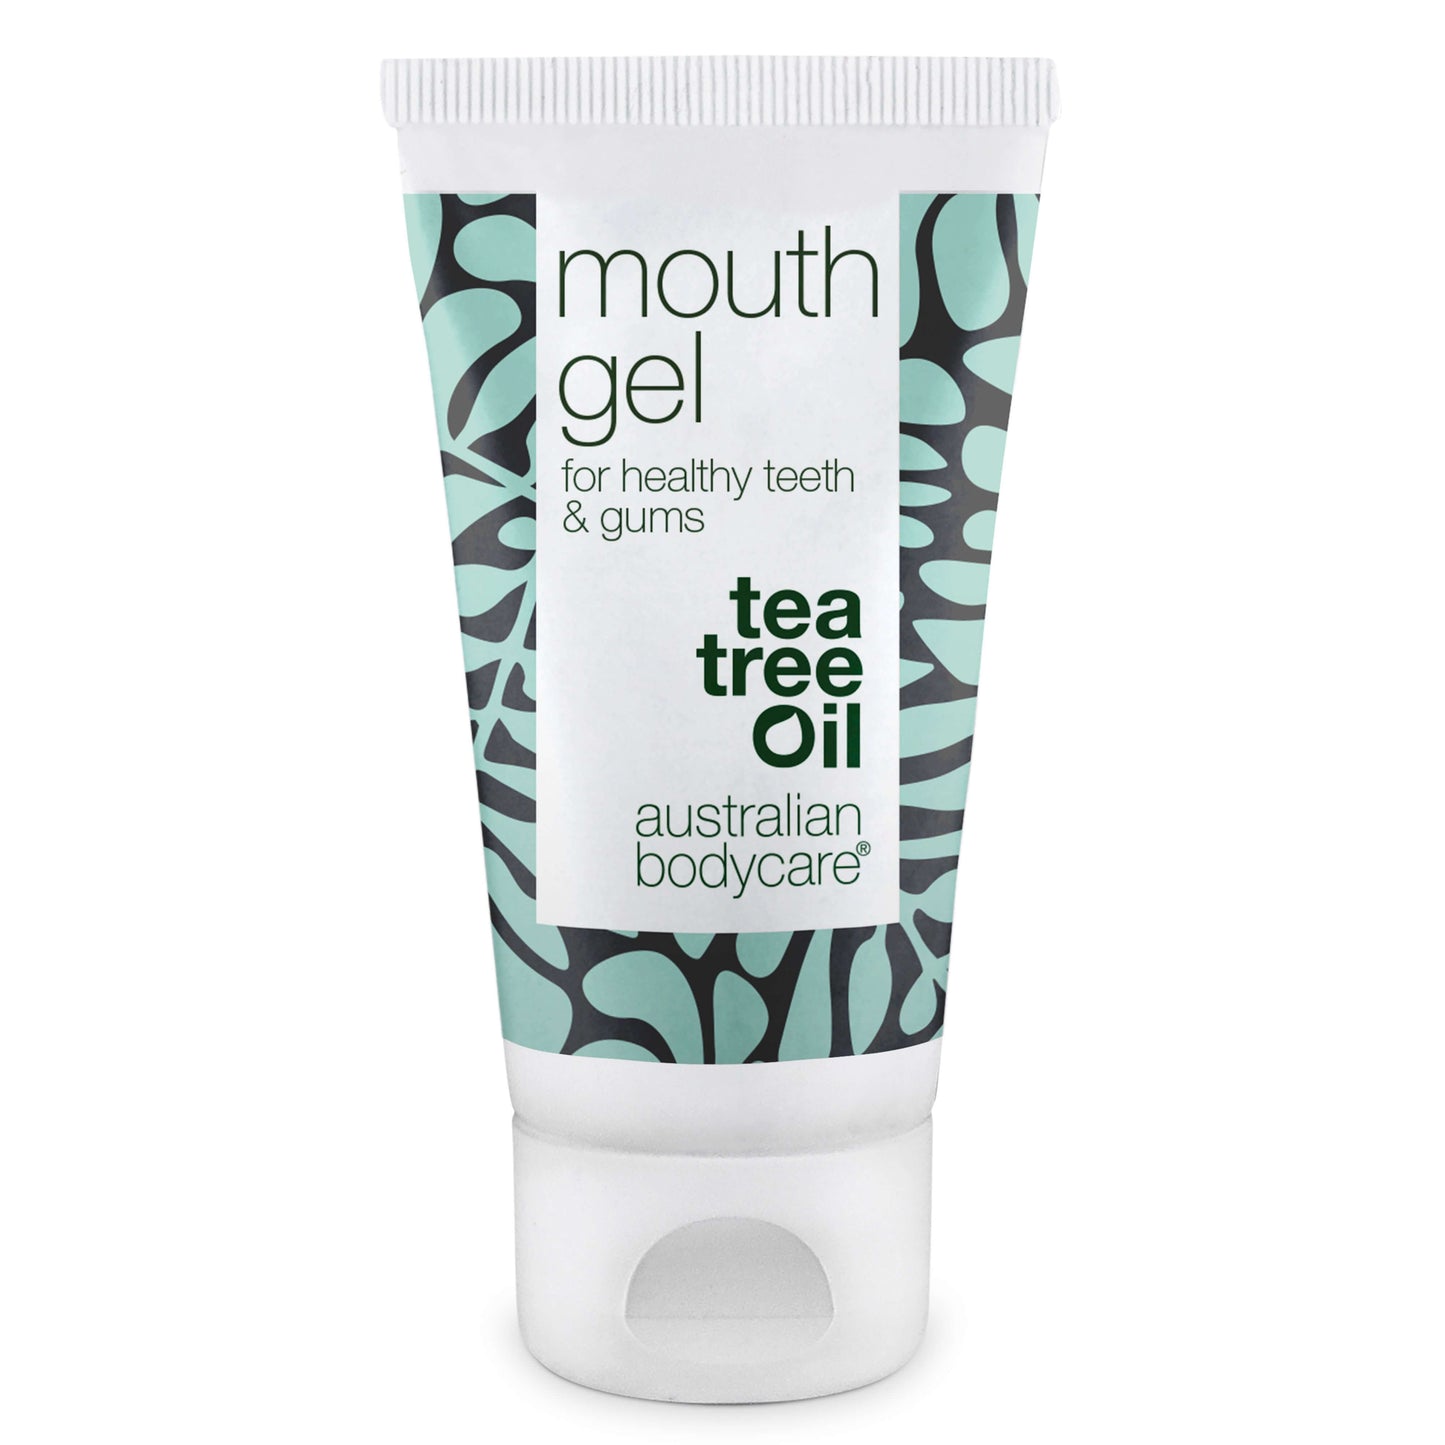 Tea Tree Oil soothing Mouth Gel - Mouth gel for the daily care of mouth ulcers, dry mouth and sore gums